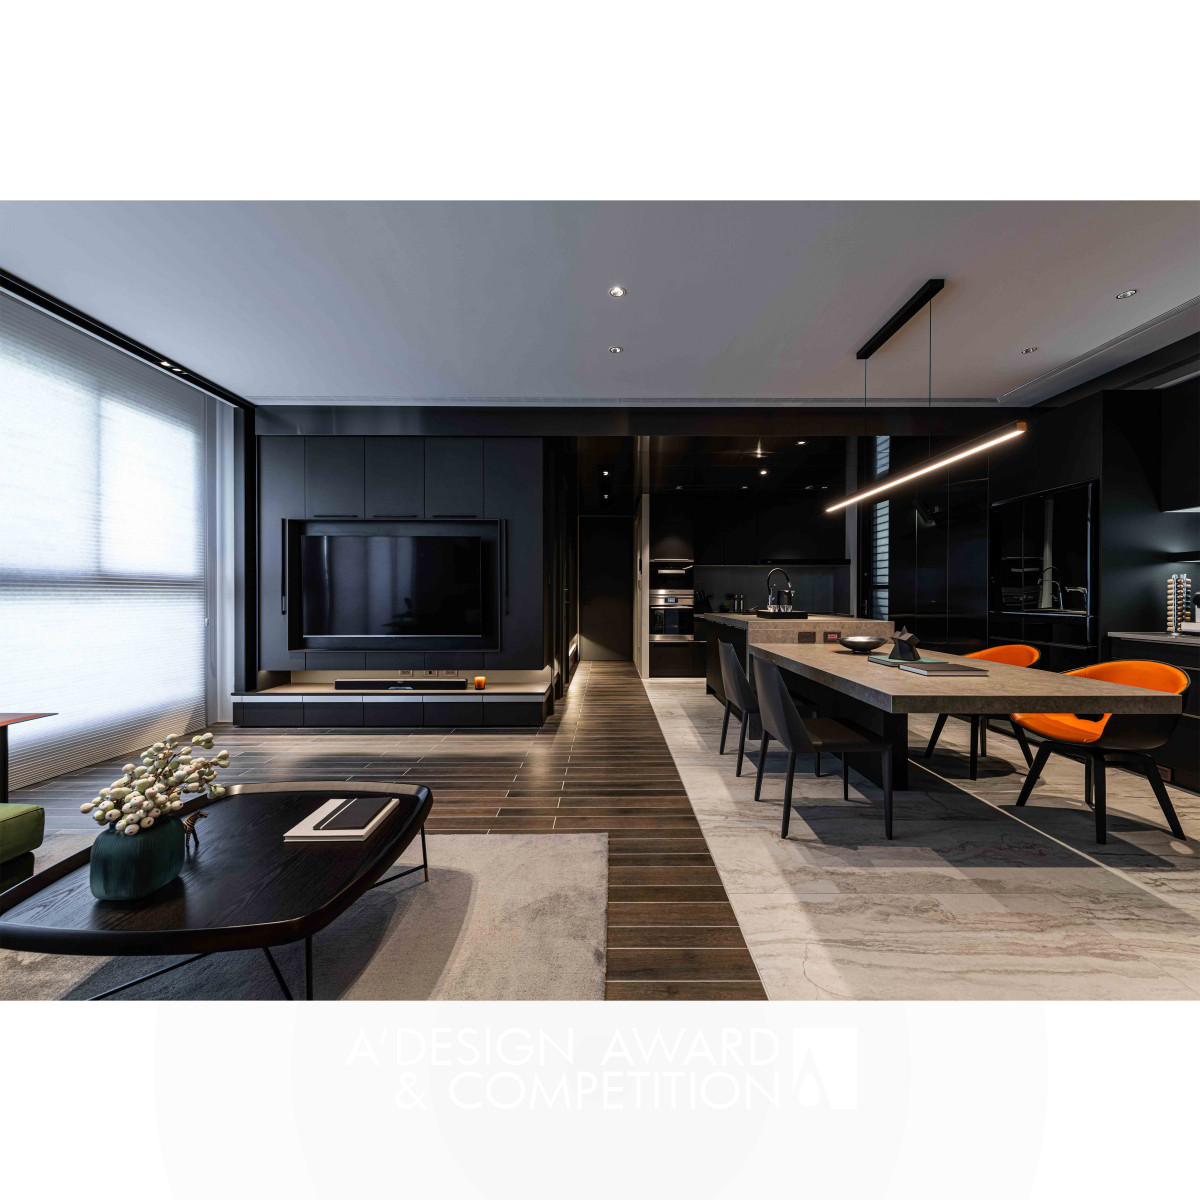 Po Chuan Kao wins Iron at the prestigious A' Interior Space, Retail and Exhibition Design Award with Black Definition Residential.